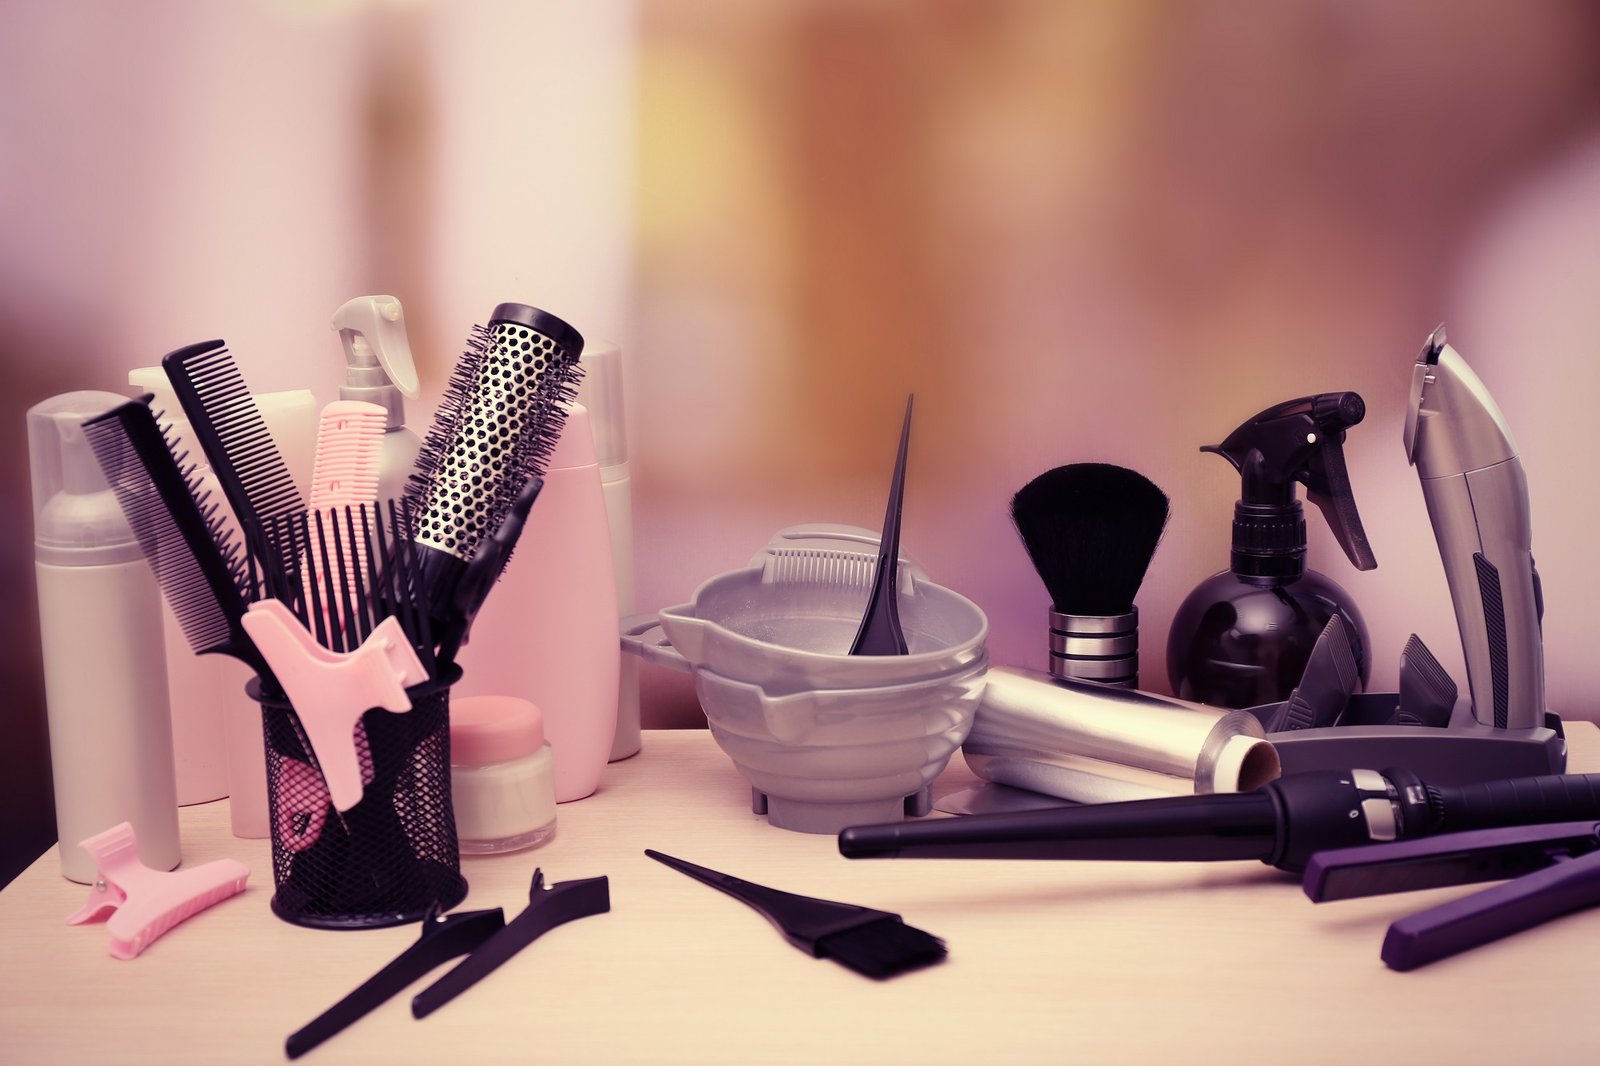 Important Questions to Ask Yourself Before Buying New Hair Salon Equipment